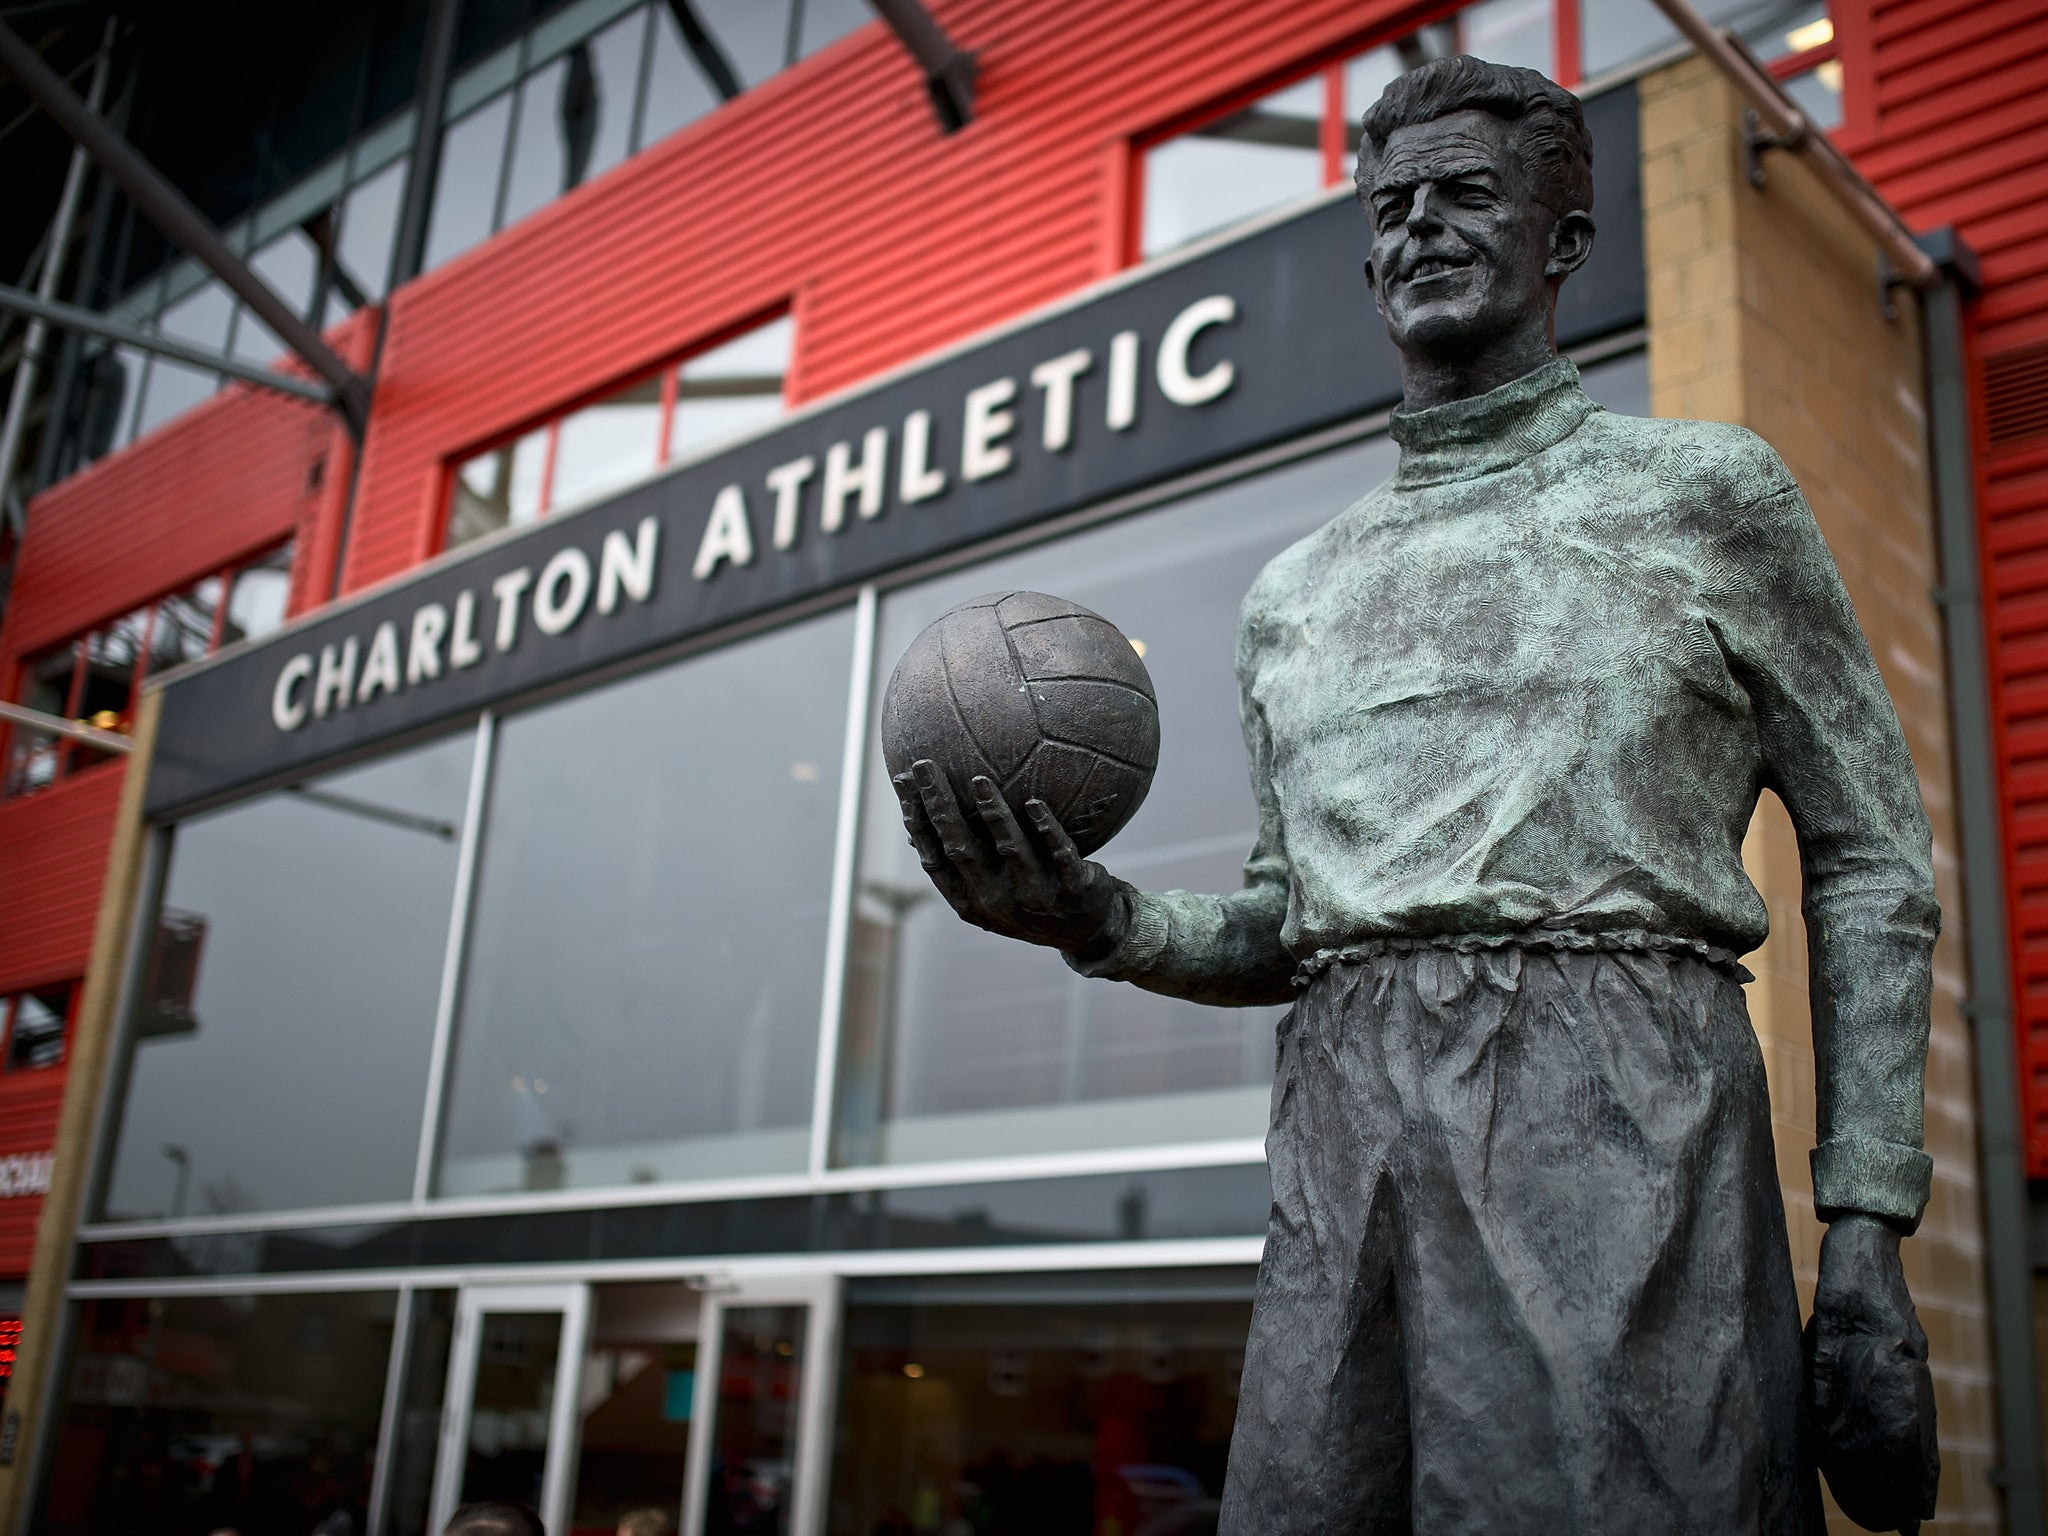 Charlton Athletic have confirmed they are in takeover talks with a Belgian millionaire